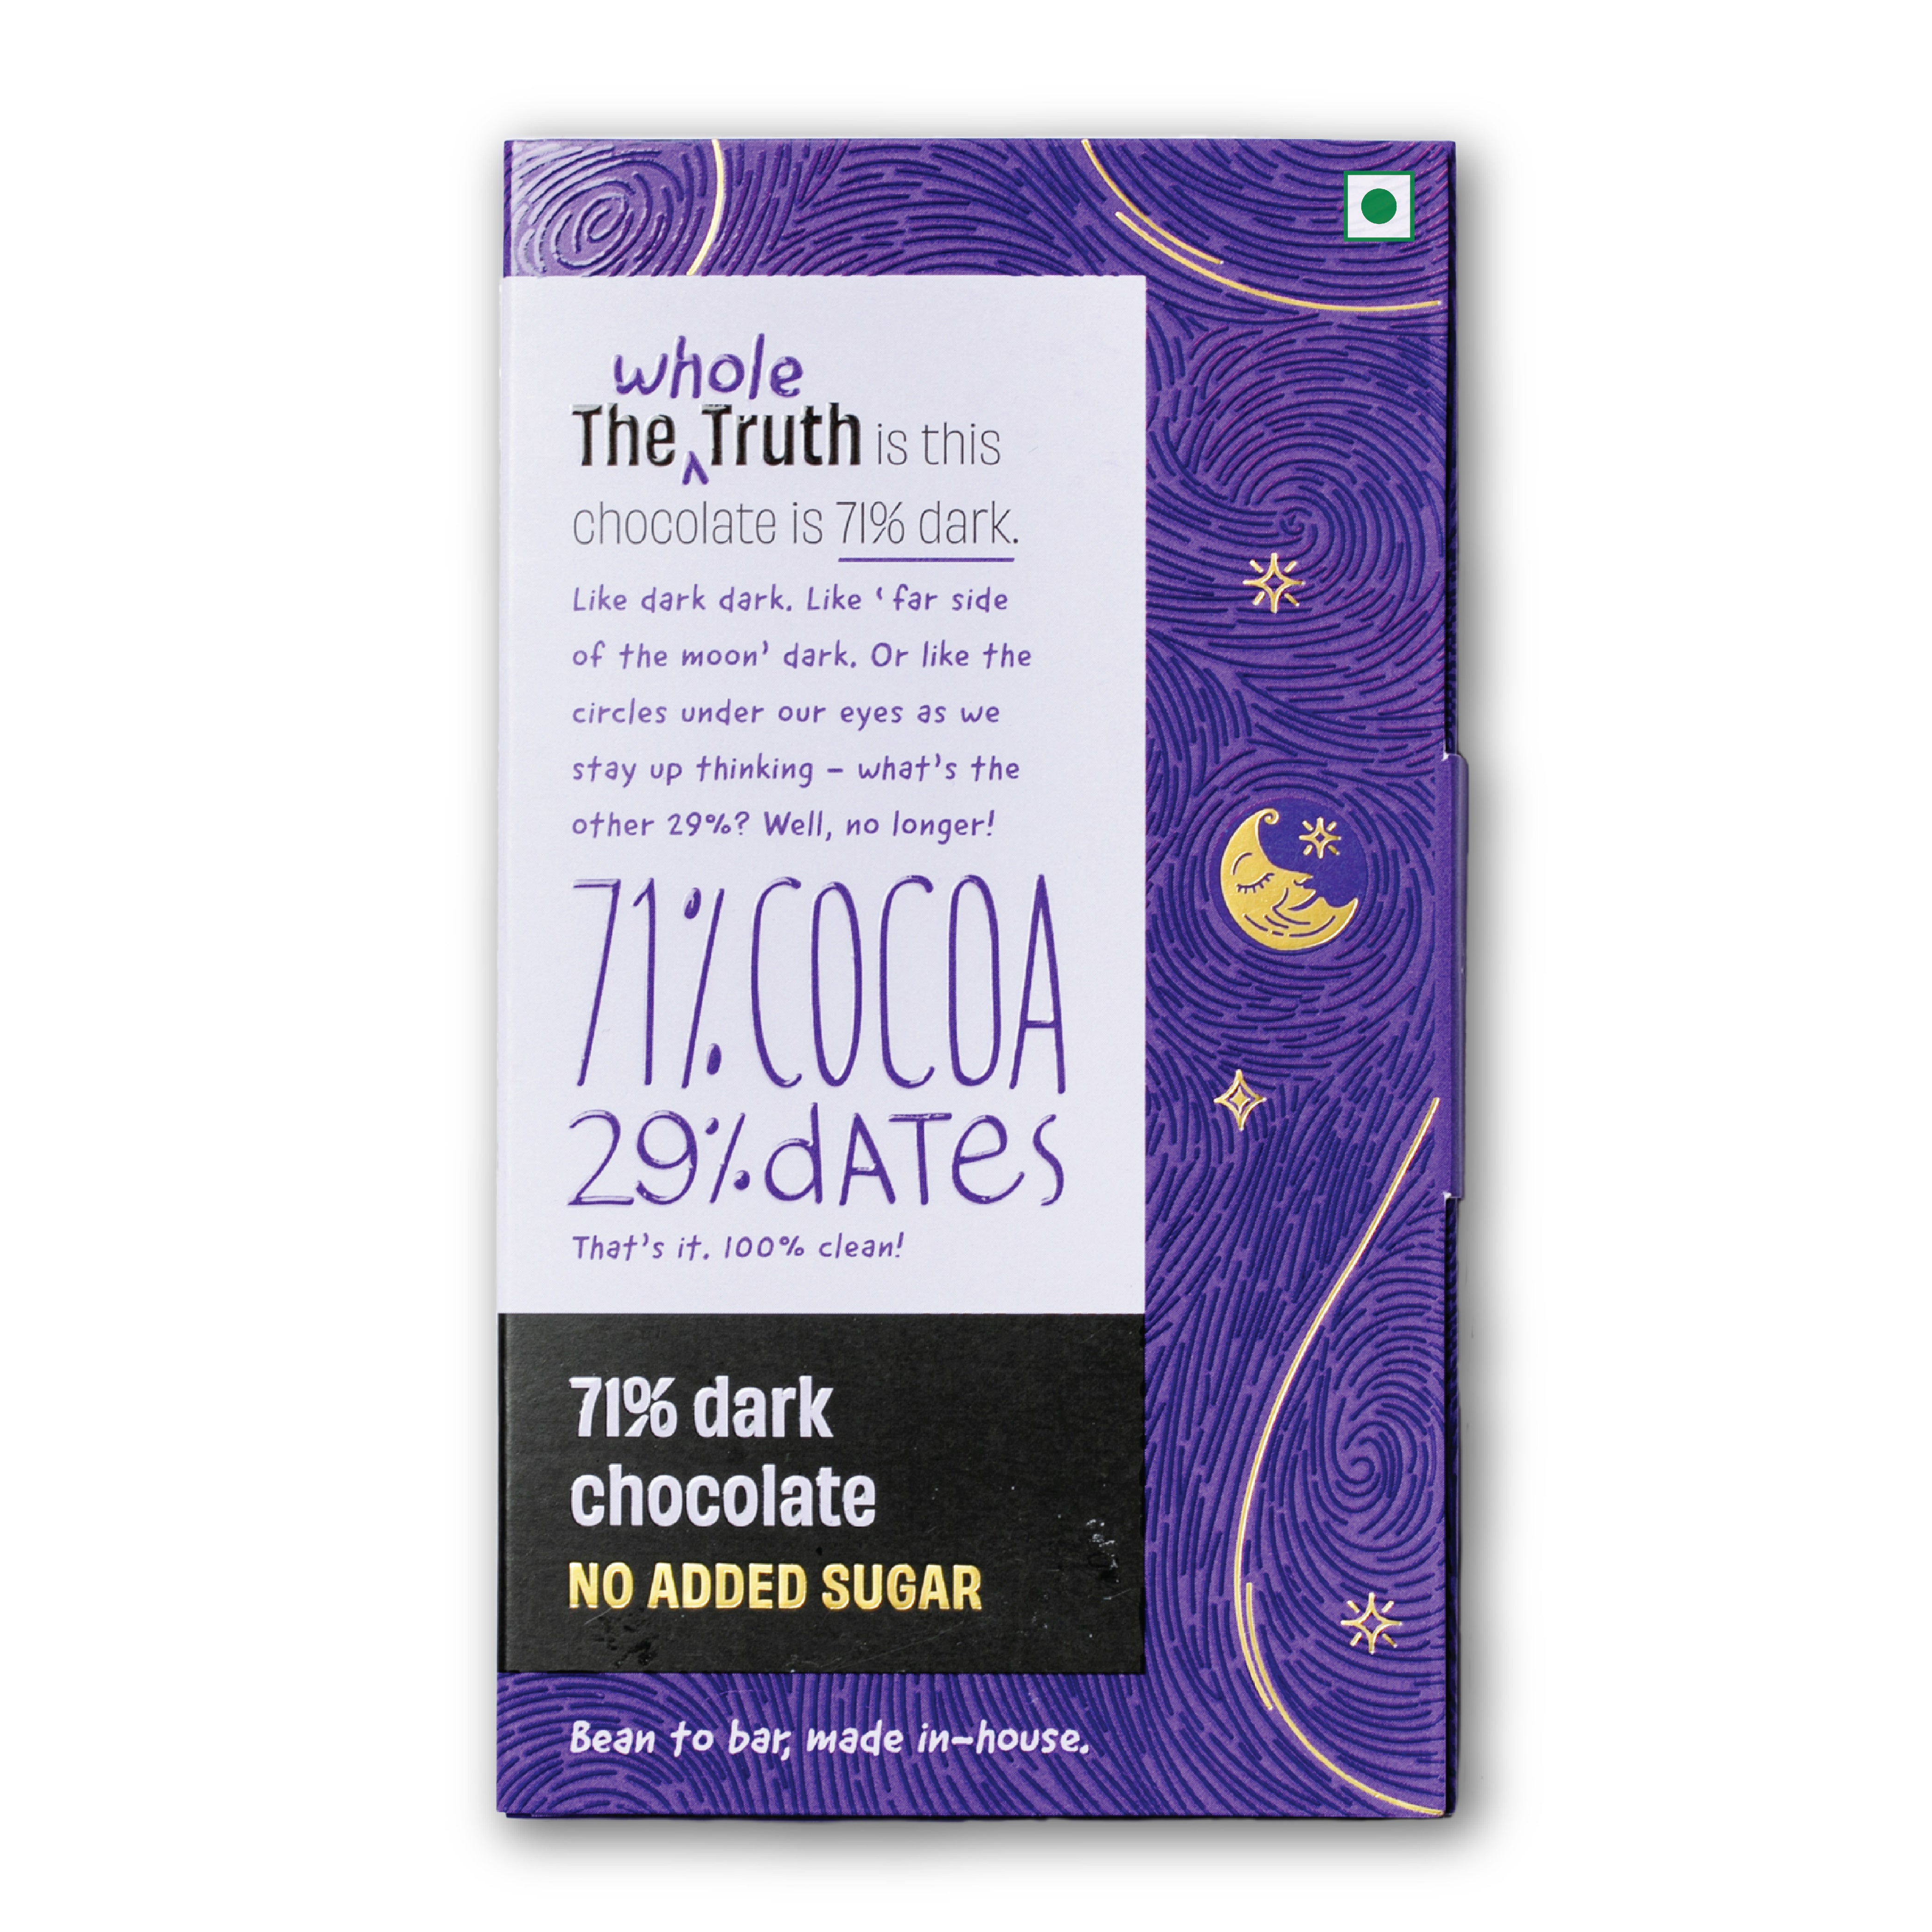 The Whole Truth - Dark Chocolate Combo | 71% Dark Chocolate | Pack of 2 | 160 g | No Added Sugar | Bean to Bar | 71% Cocoa 29% Dates